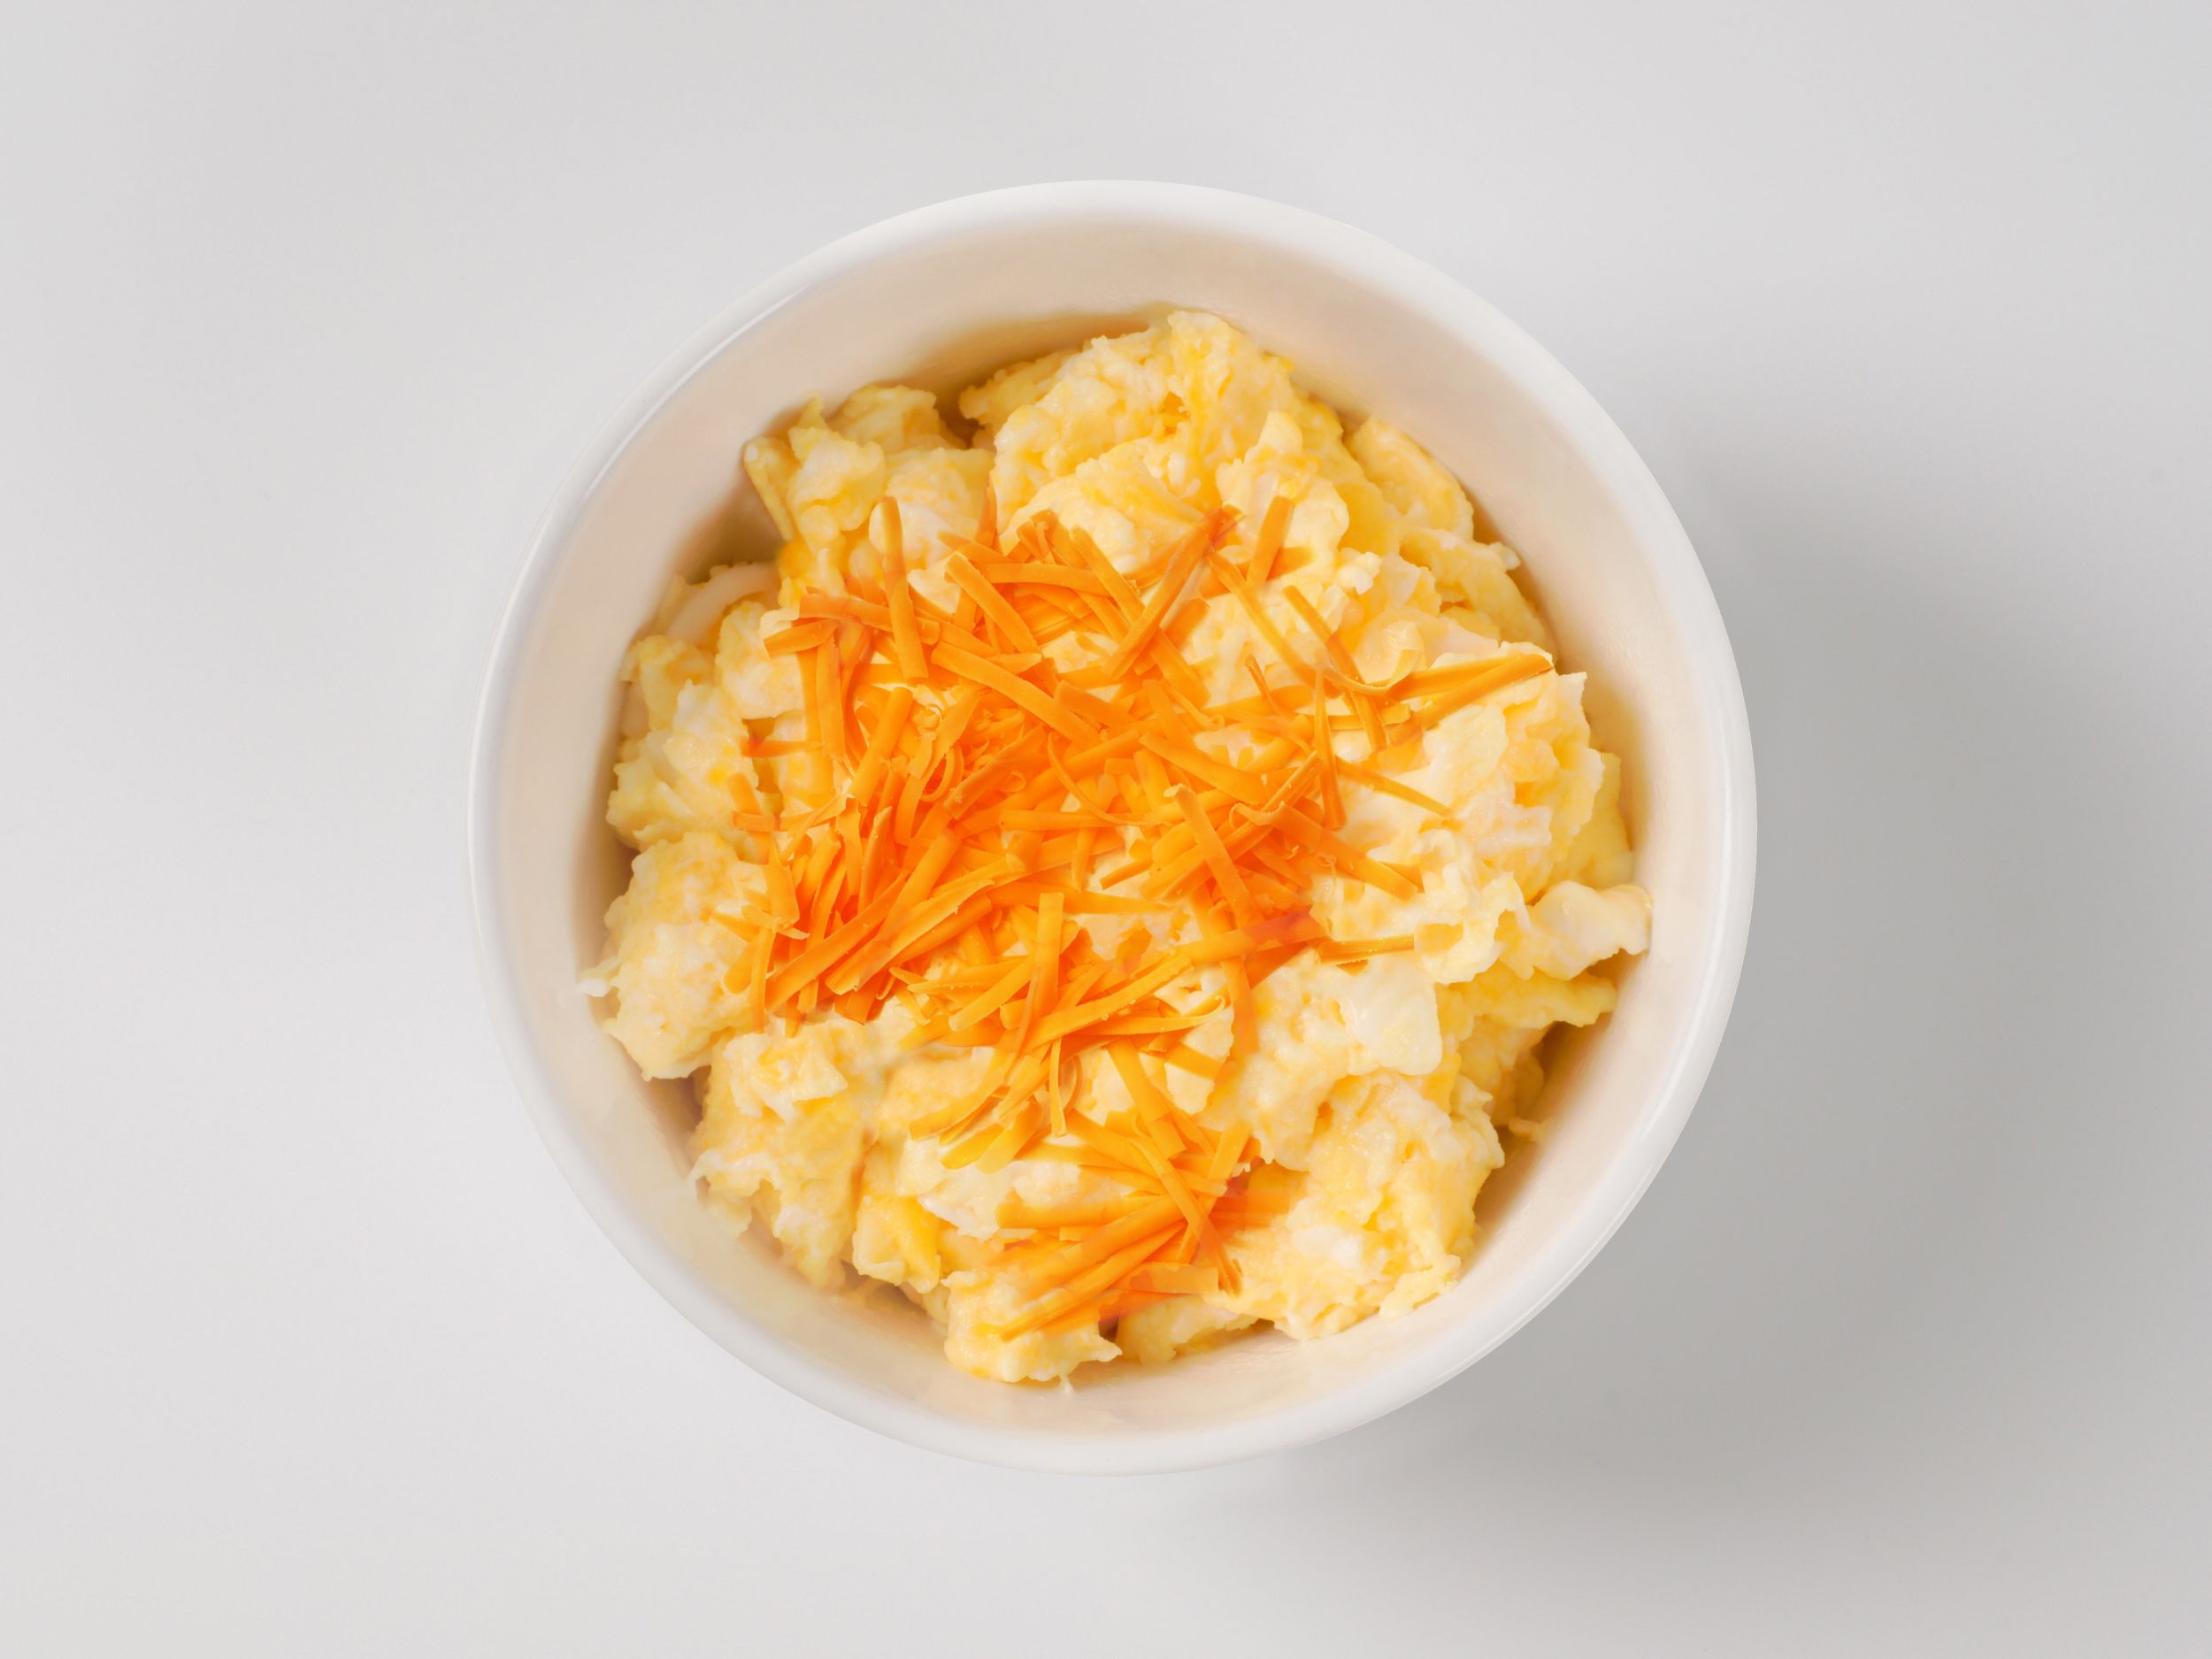 Top view of a bowl of scrambled eggs sprinkled with cheese